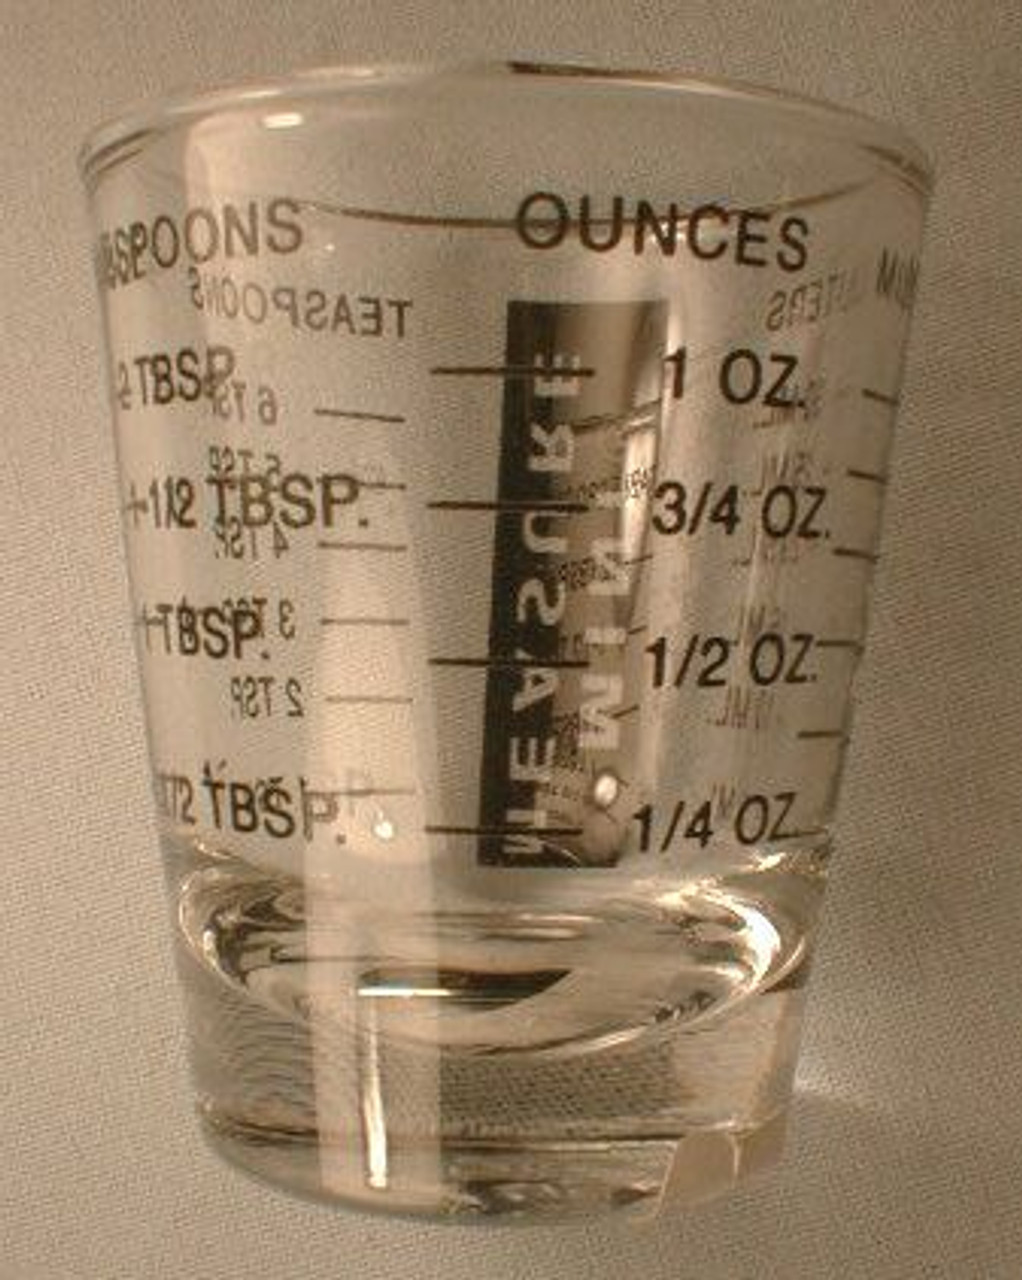 Kolder Glass Mix-in-Measure, 2 Cup - Browns Kitchen